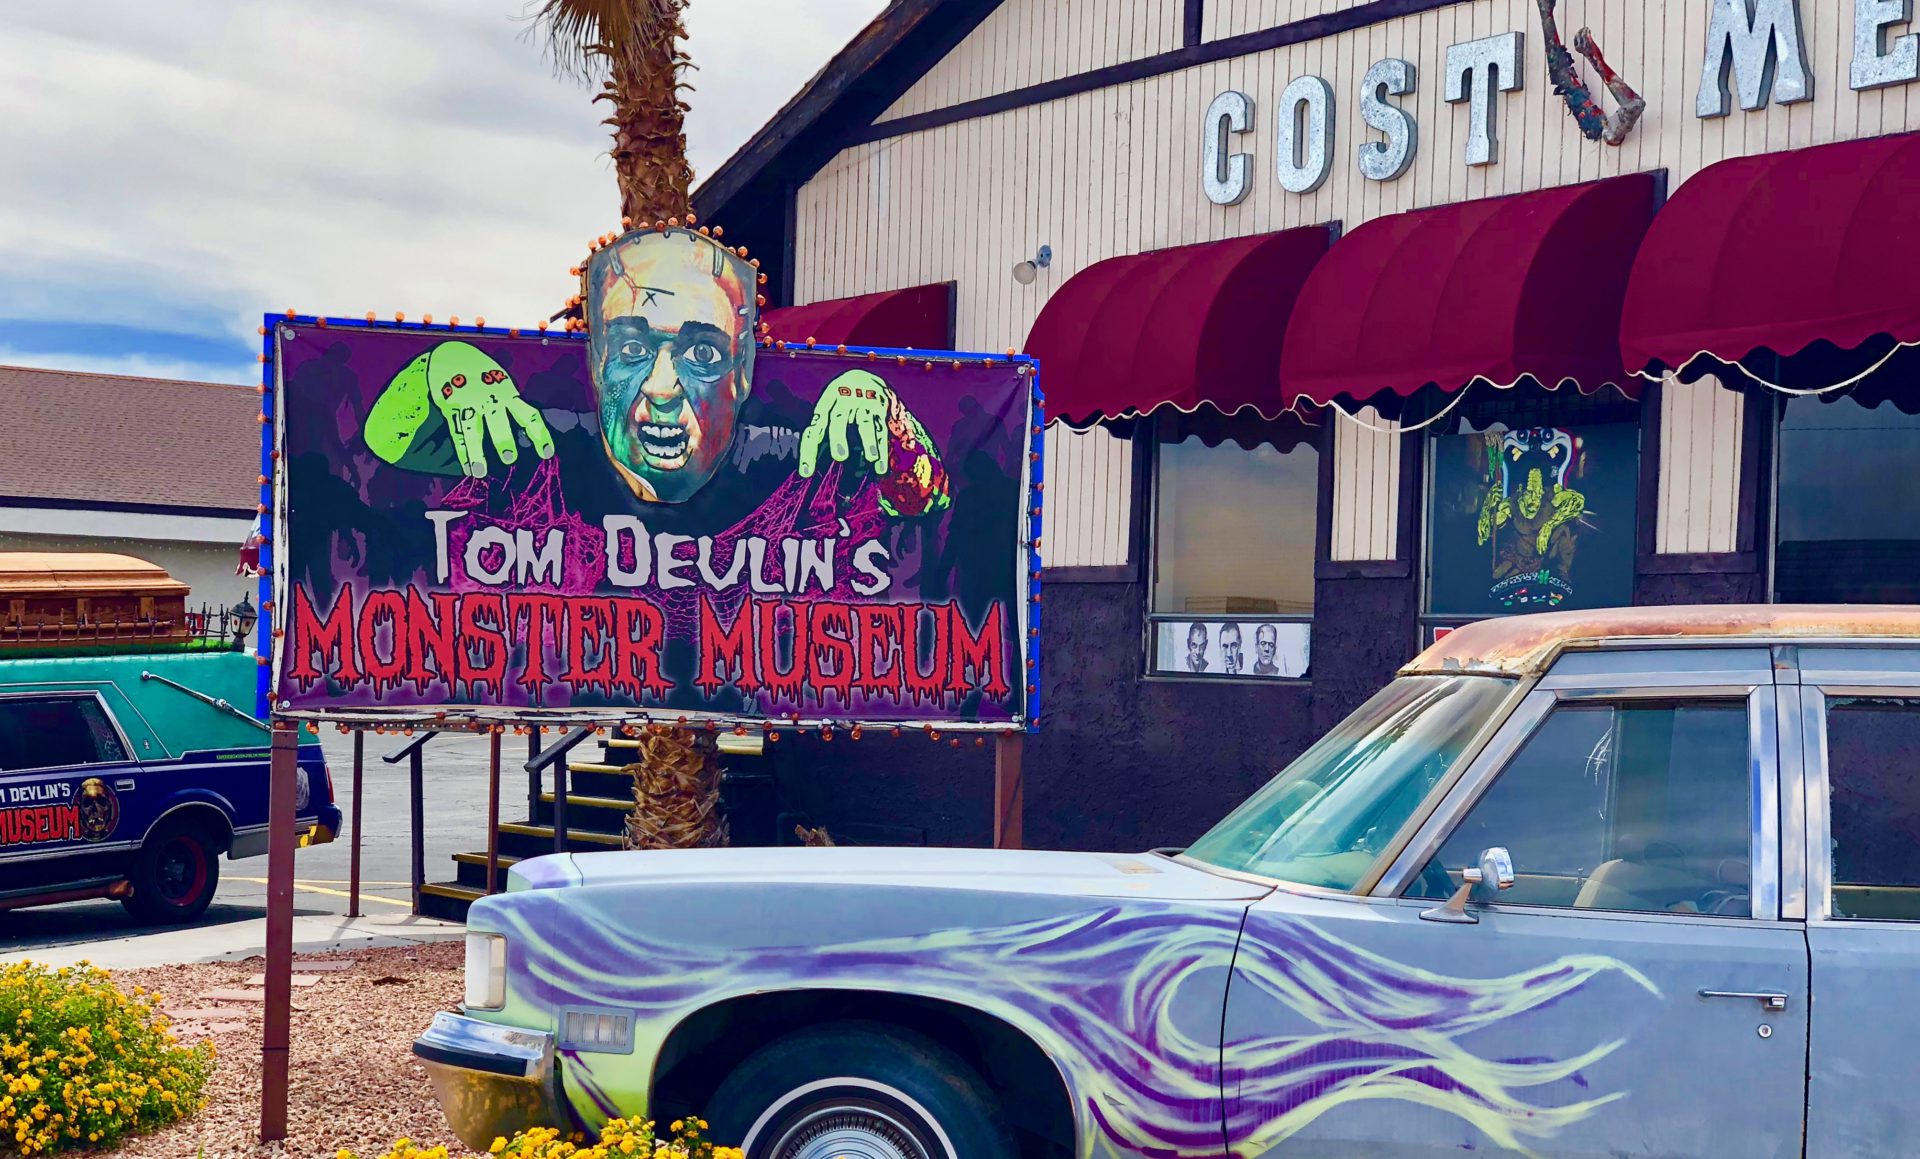 The outside of the Tom Devlin’s Monster Museum where it has a zombie sign saying it's name and a blue retro car next to it. The museum showcases a diverse array of meticulously crafted monster sculptures and memorabilia within a themed environment reminiscent of classic horror films.